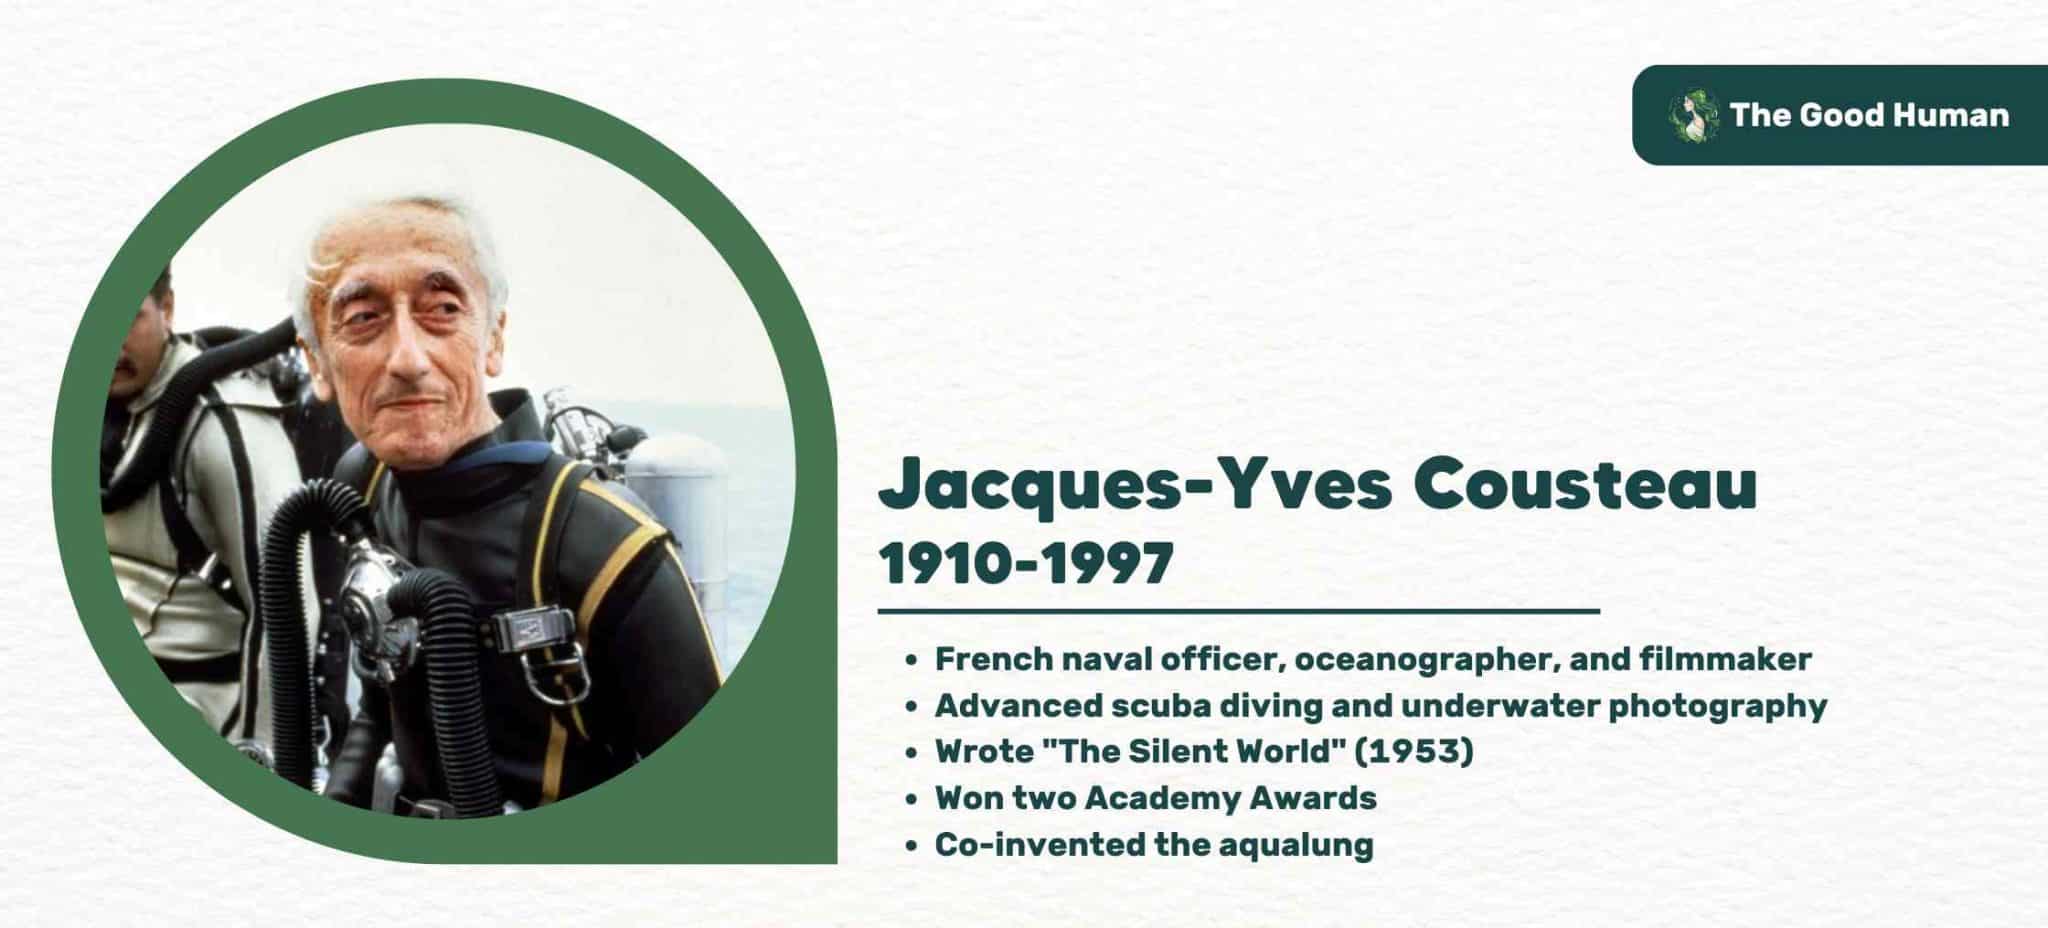 About Jacques-Yves Cousteau